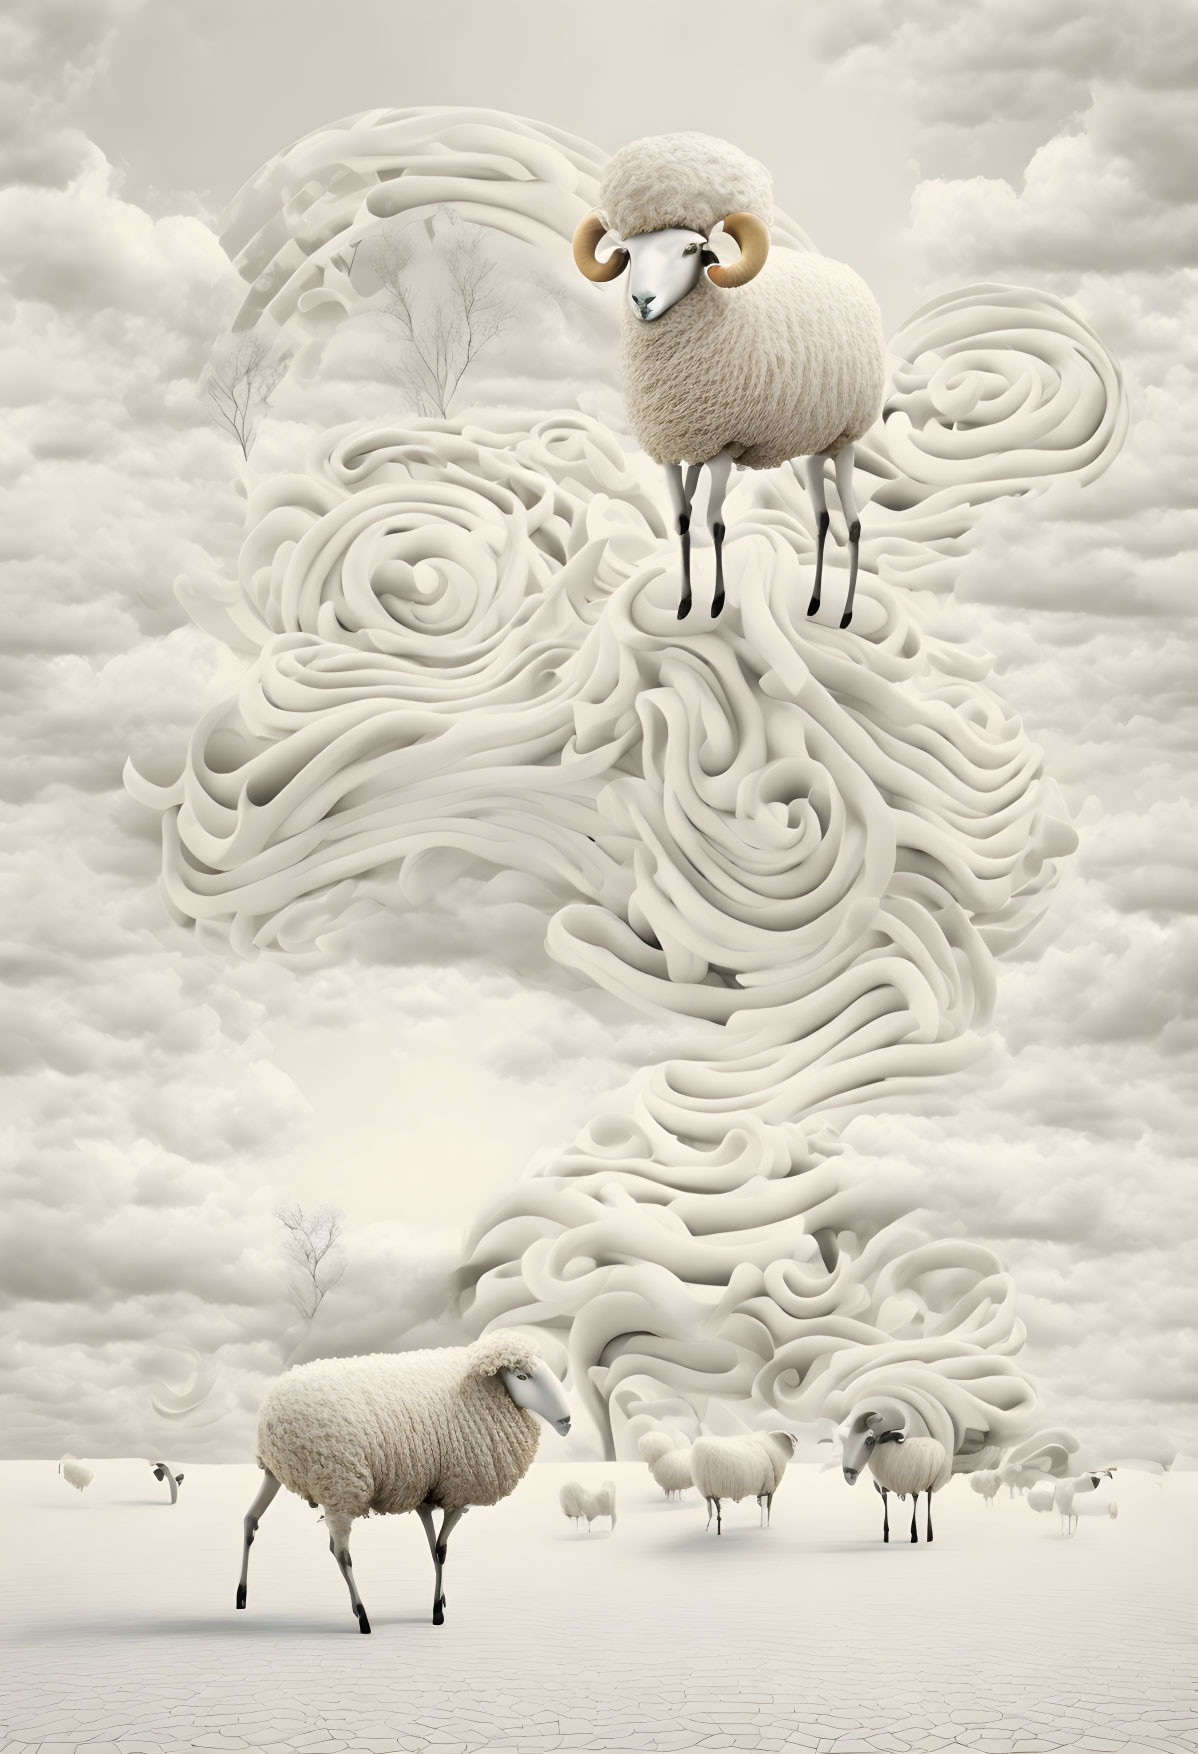 Surreal image of sheep in barren landscape with intricate cloud formation